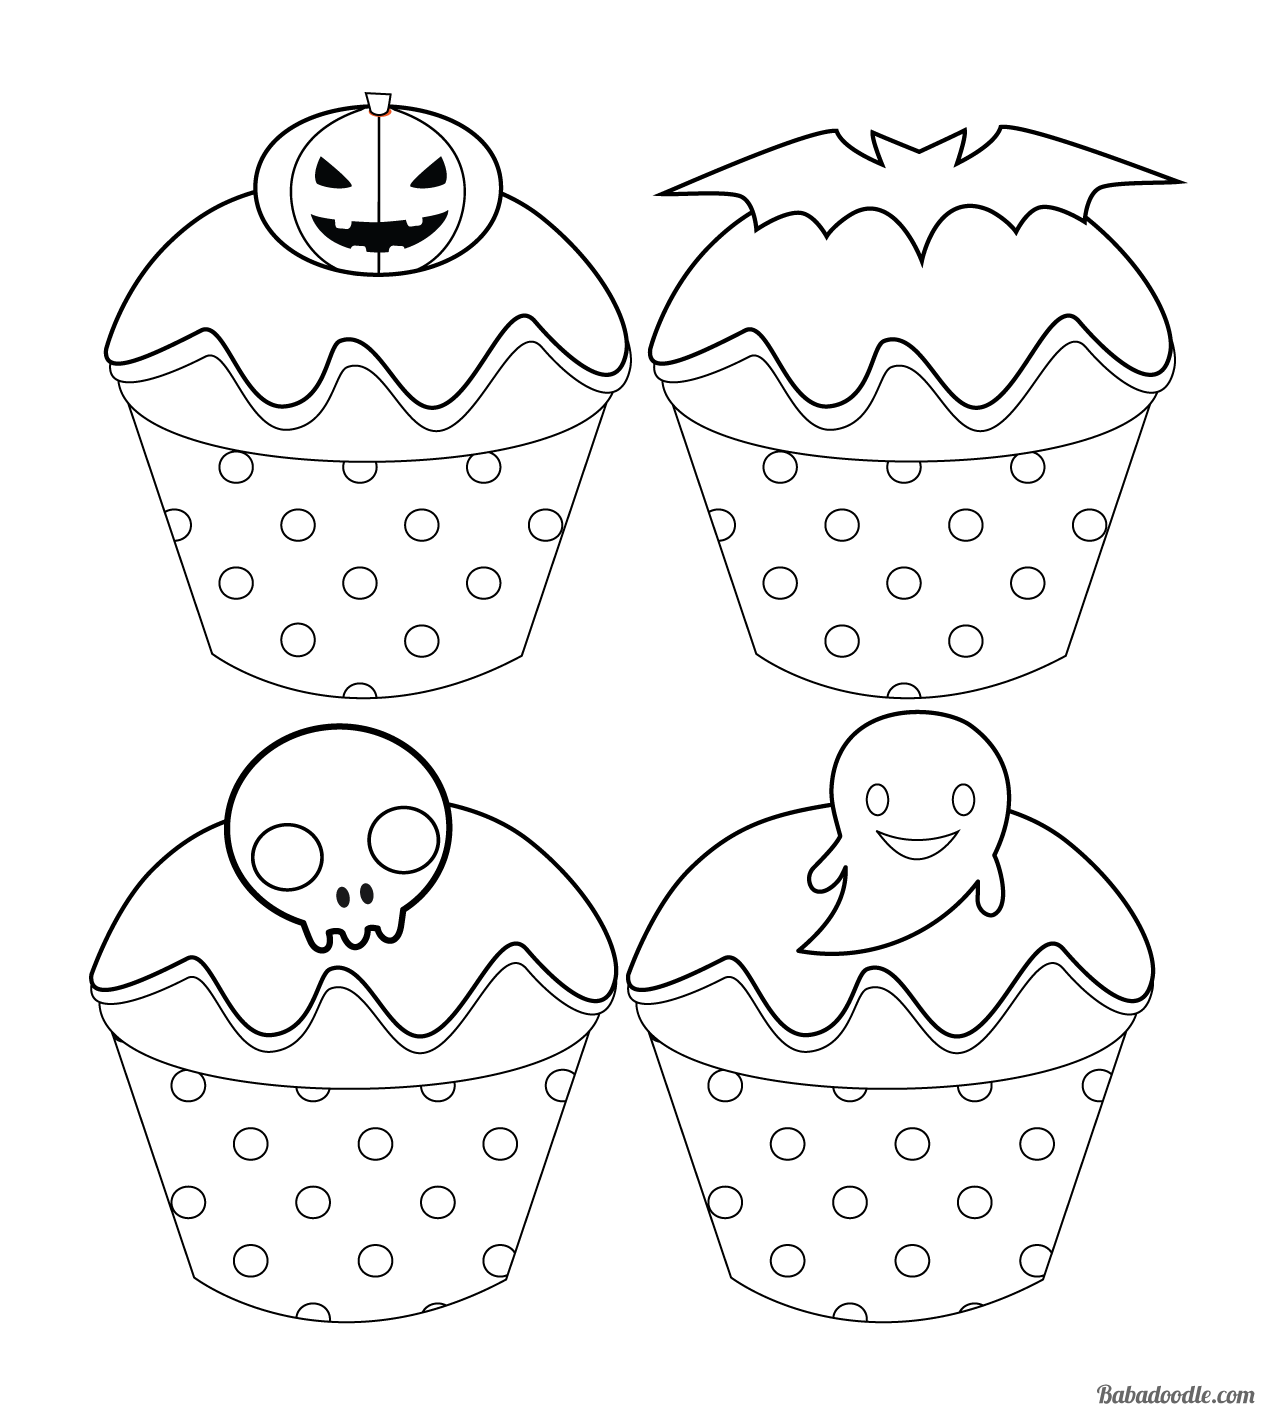 Free Halloween Cupcake Coloring Page Babadoodle